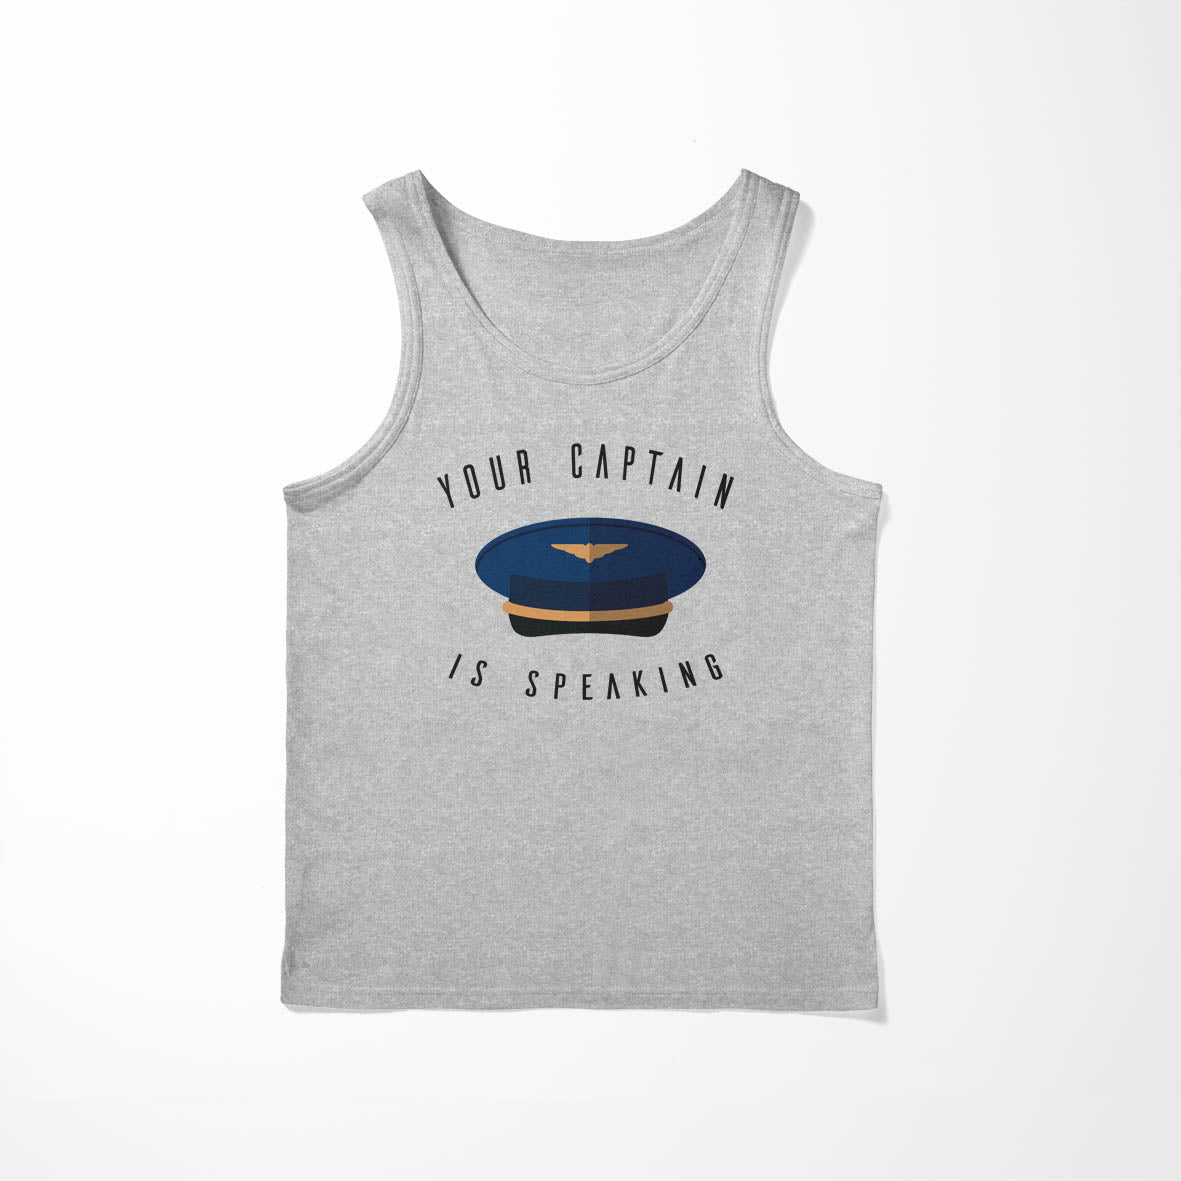 Your Captain Is Speaking Designed Tank Tops